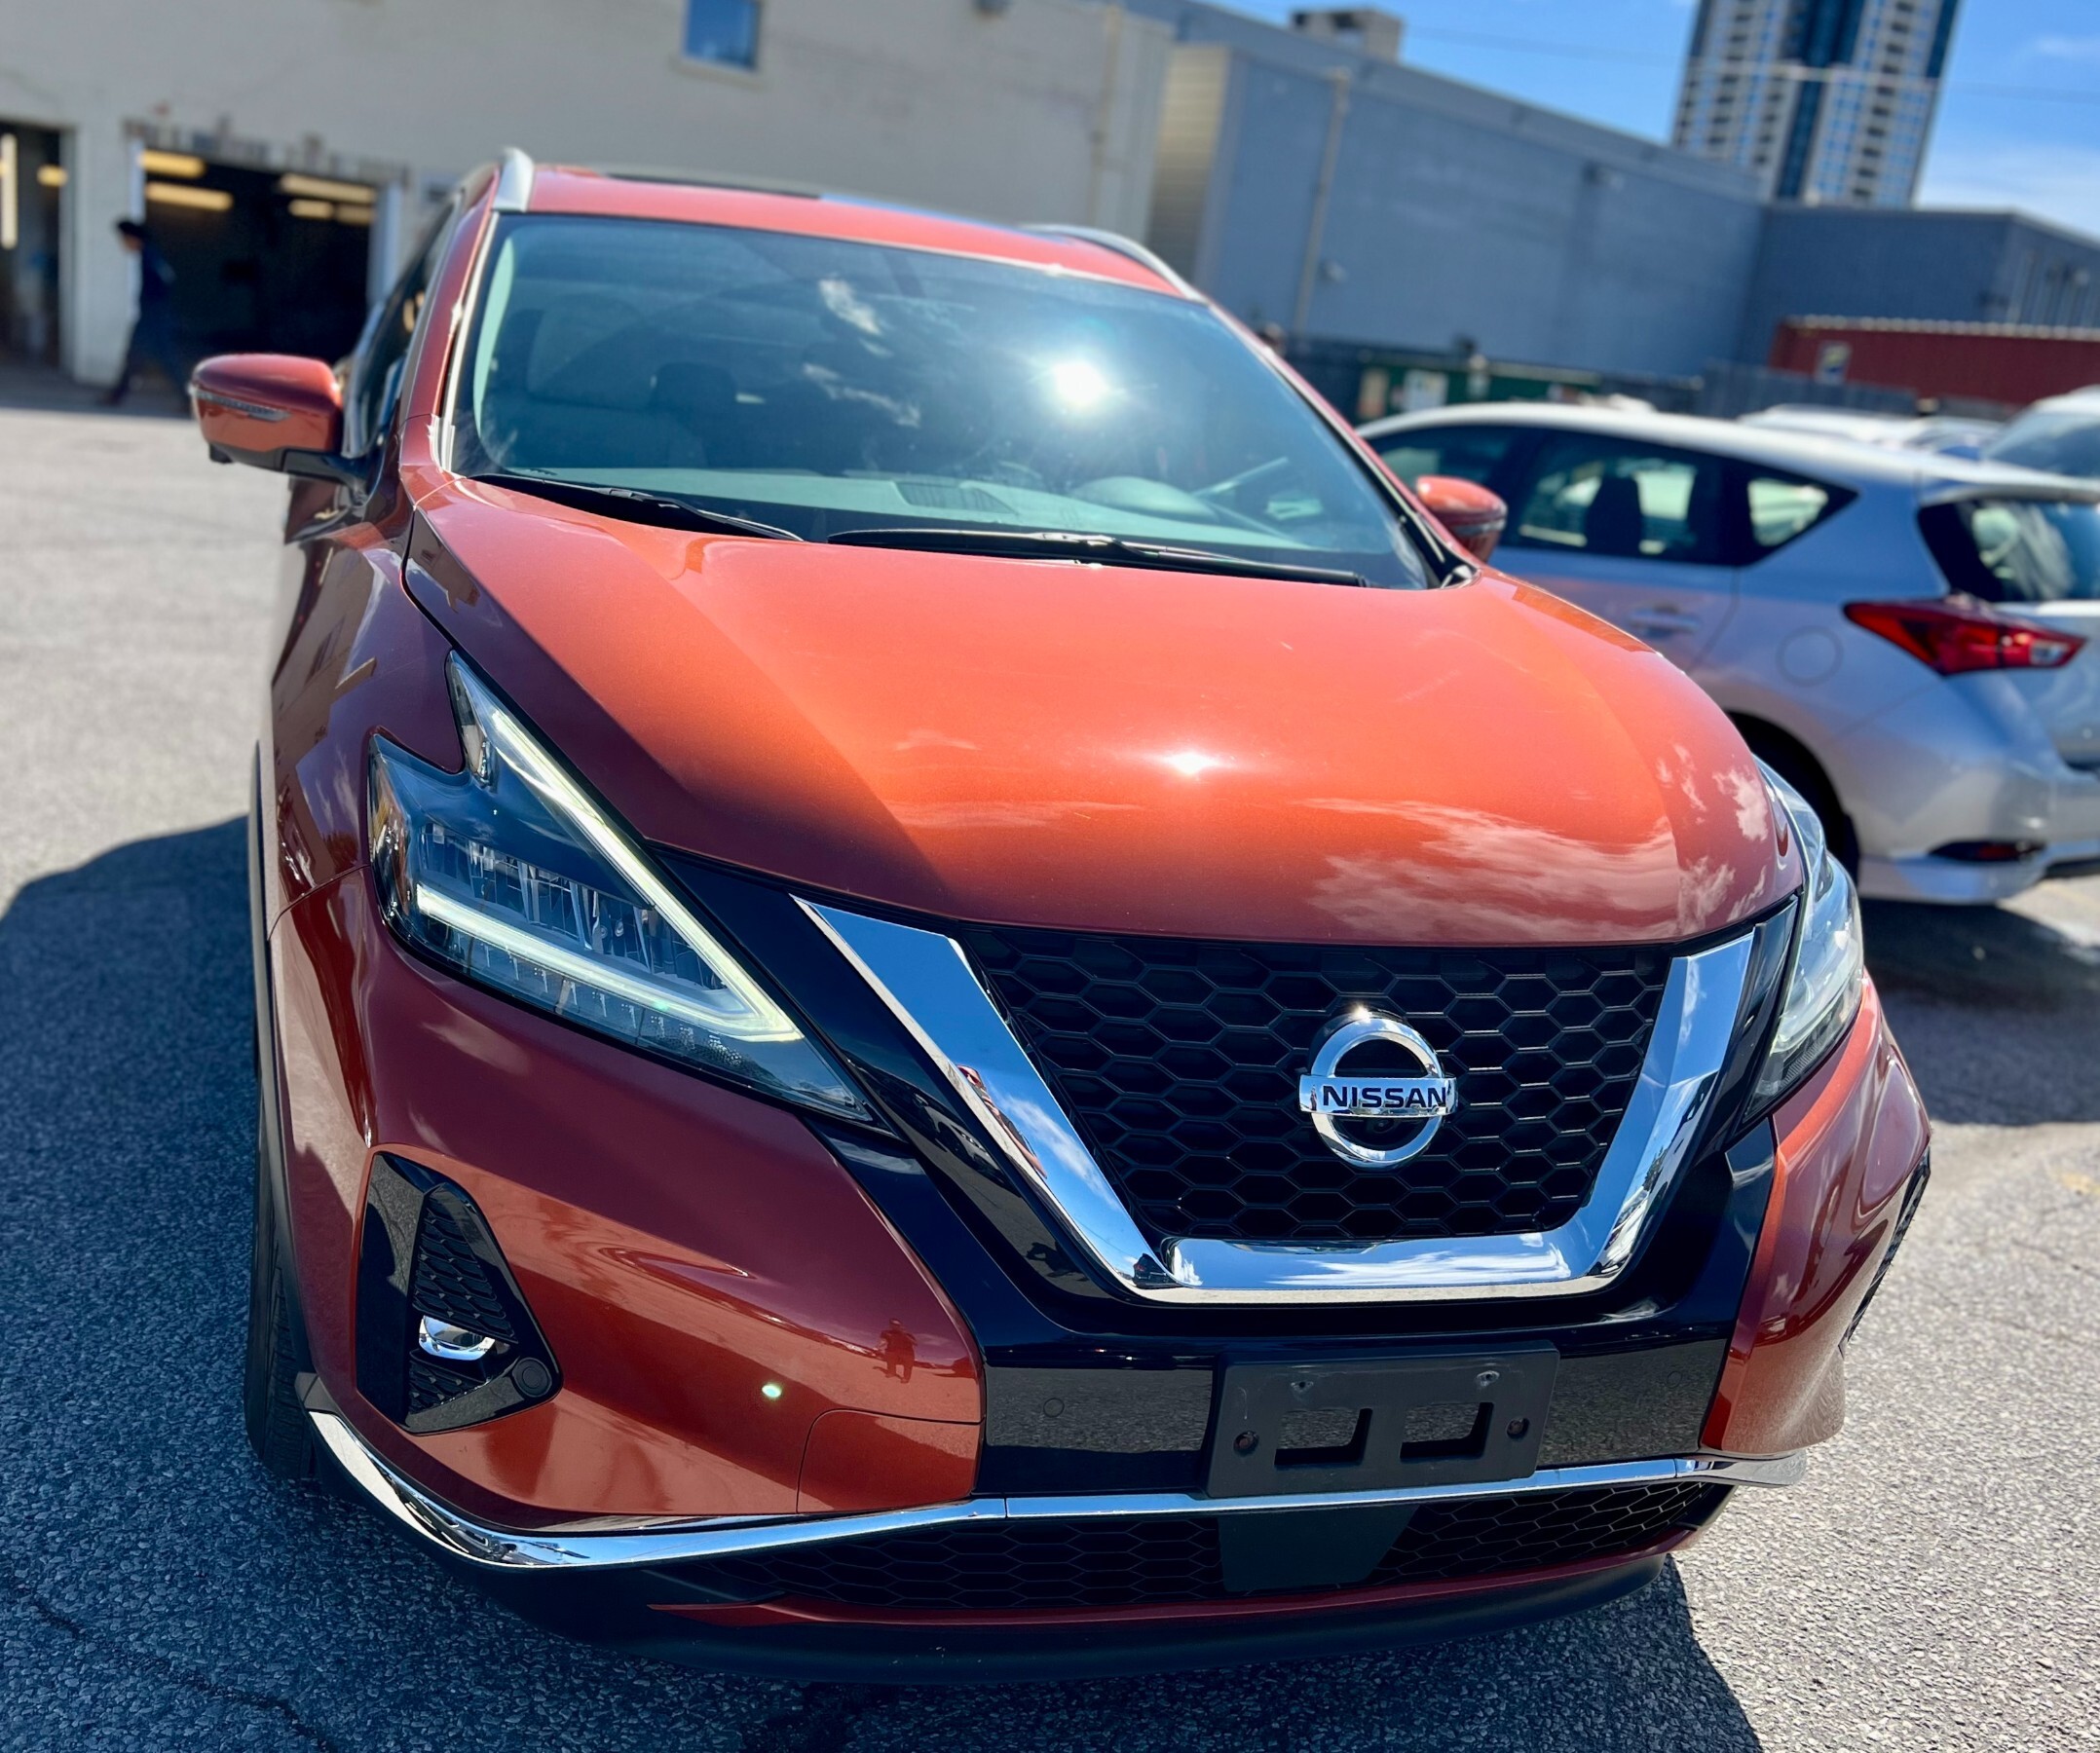 2019 Nissan Murano SL - SALE EVENT MAY 24- MAY 25